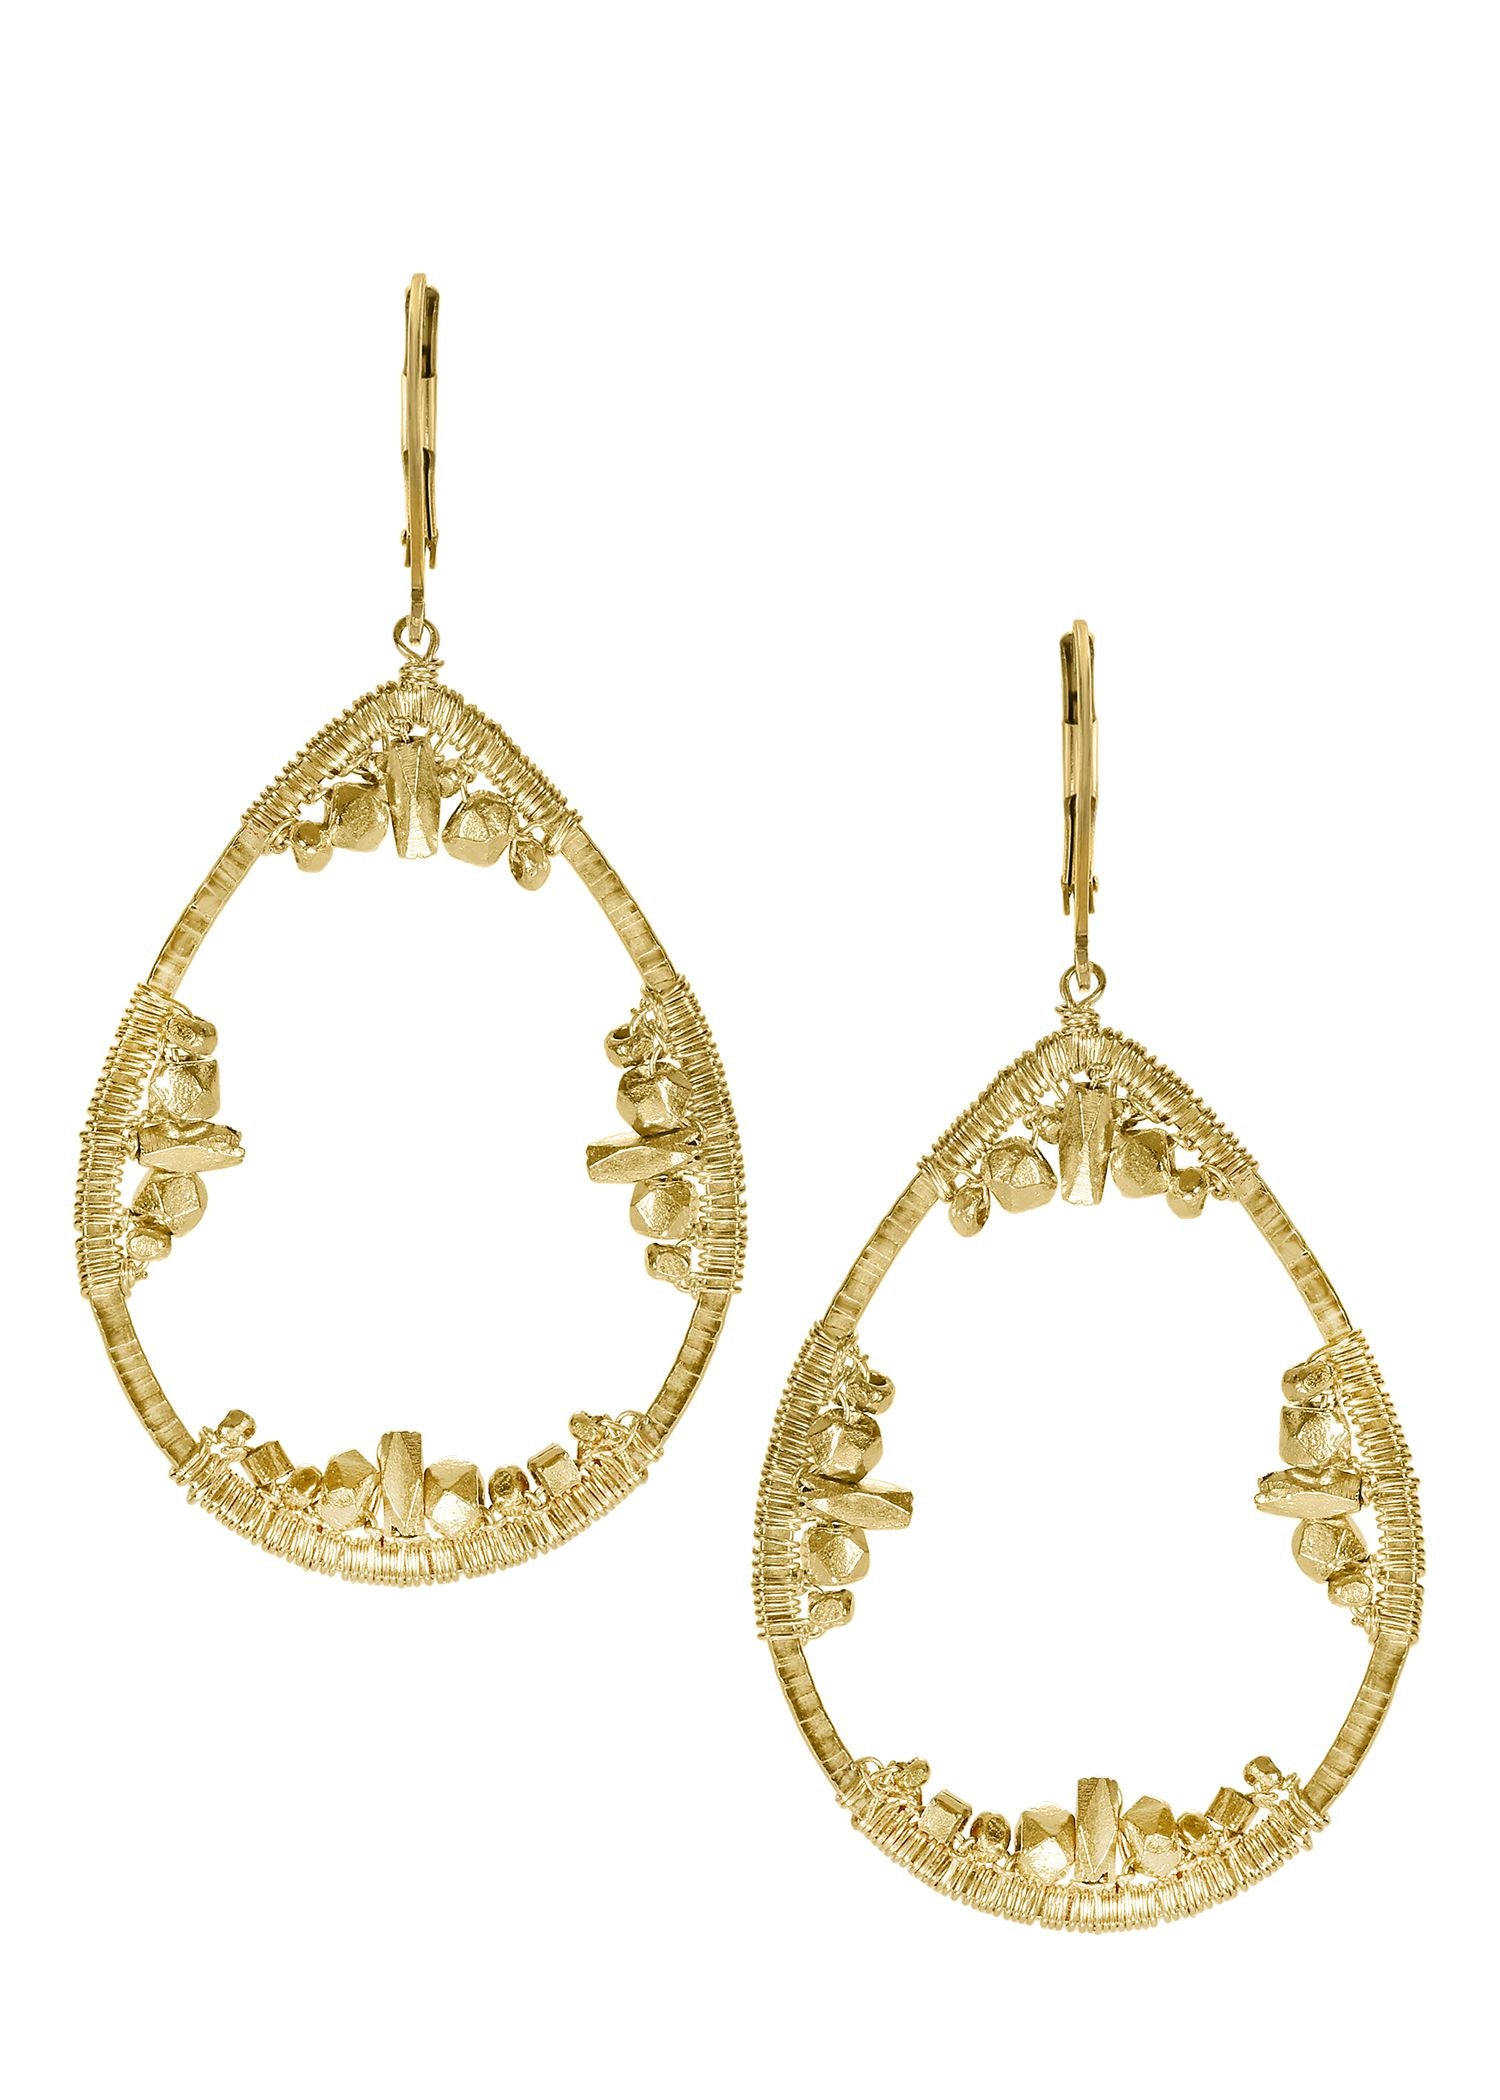 14k gold fill Earrings measure 2-1/8" in length (including the levers) and 2-1/8" in width Handmade in our Los Angeles studio